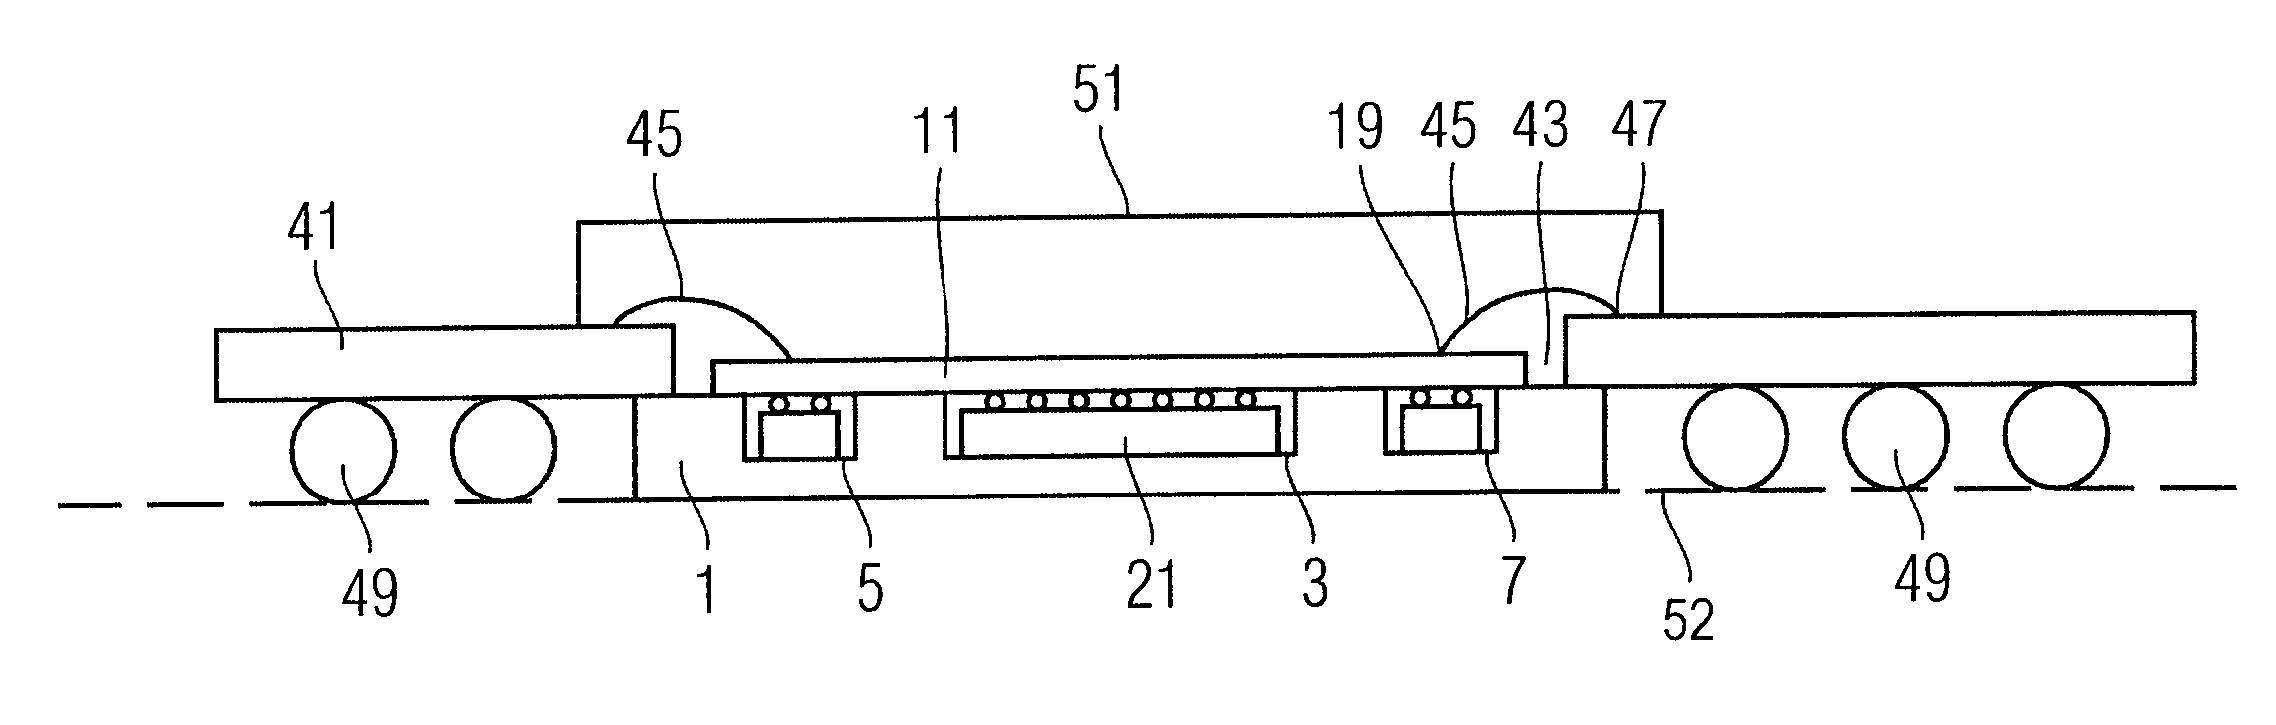 Integrated circuit package employing a heat-spreader member